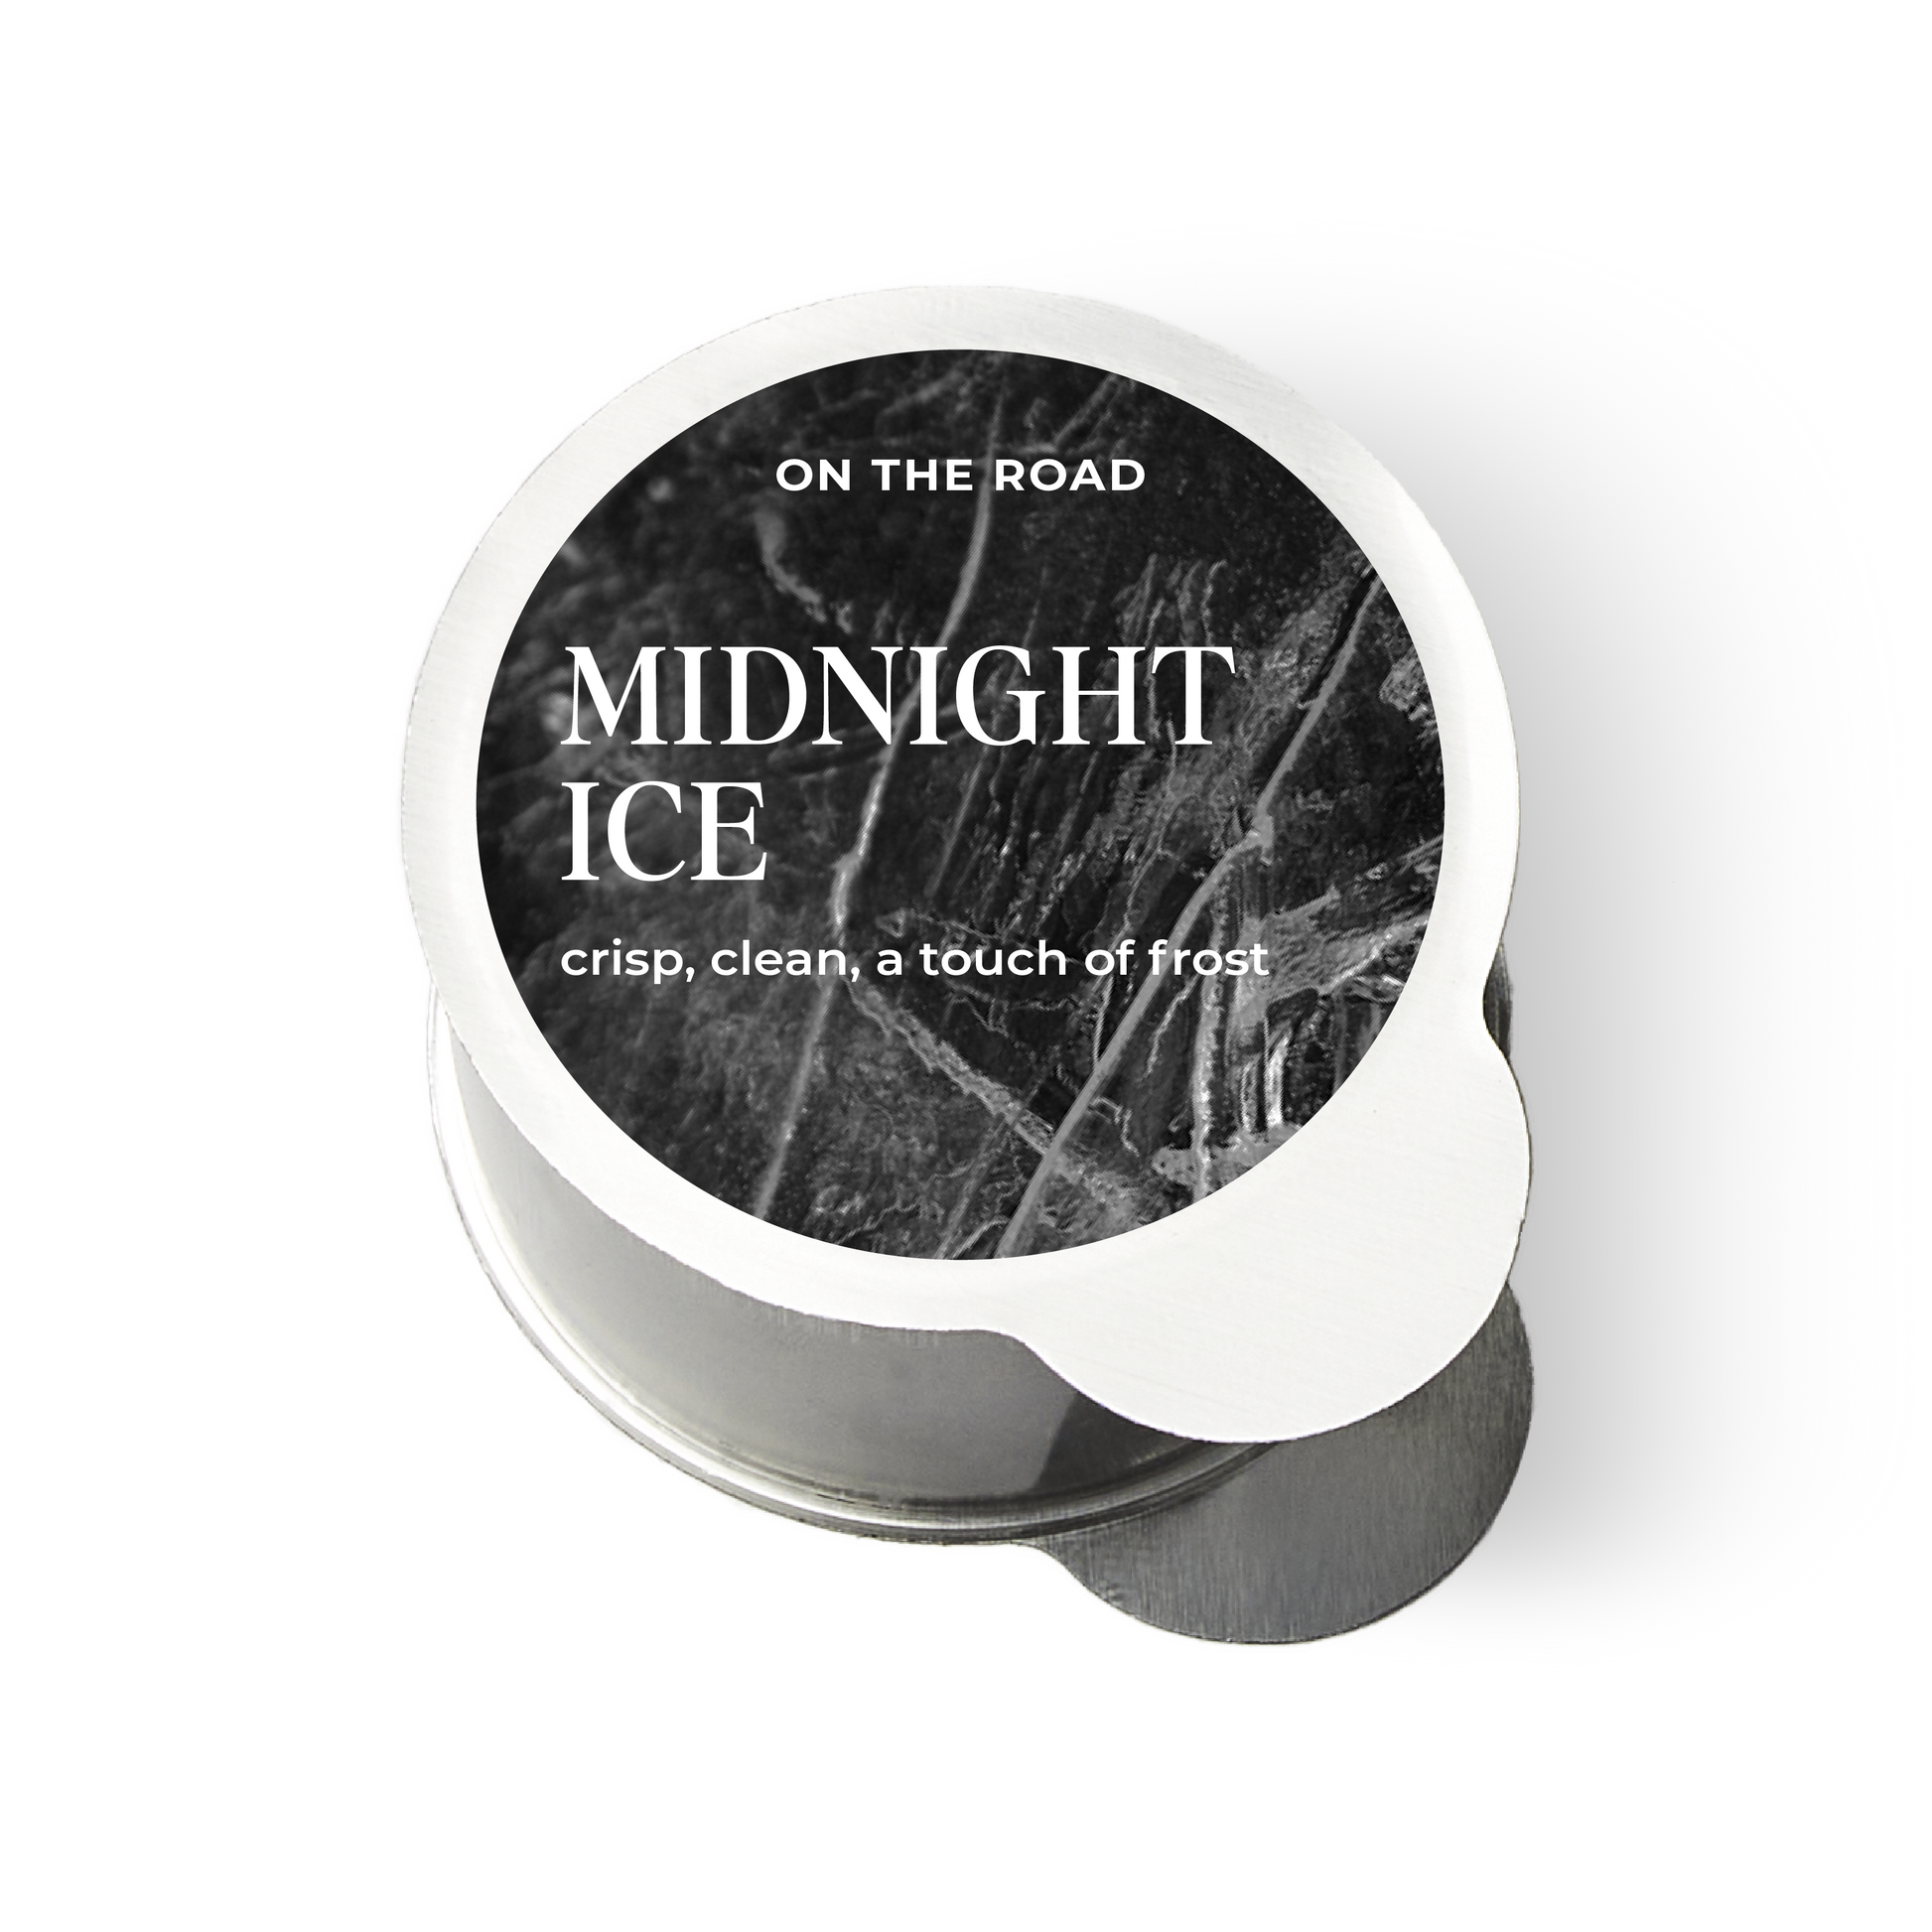 Midnight Ice - On the Road - MojiLife